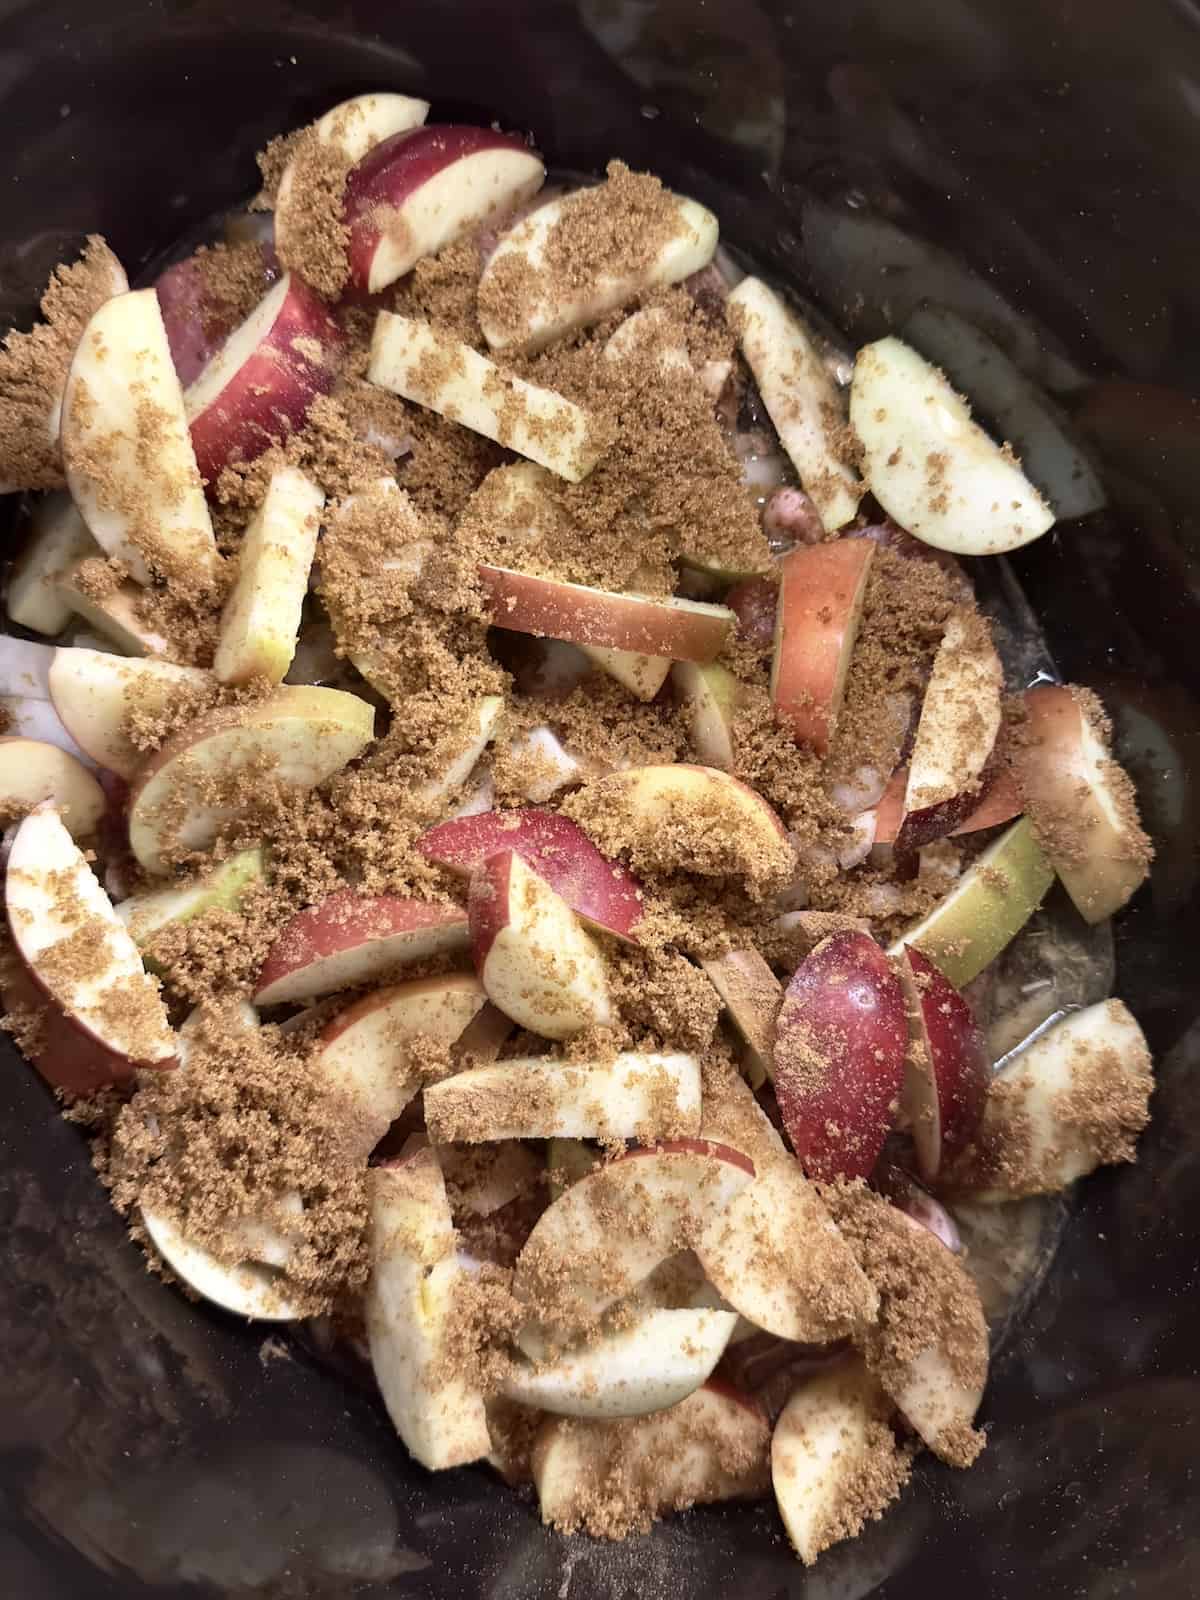 apples, pork chops, onions and seasonings uncooked in a crock pot